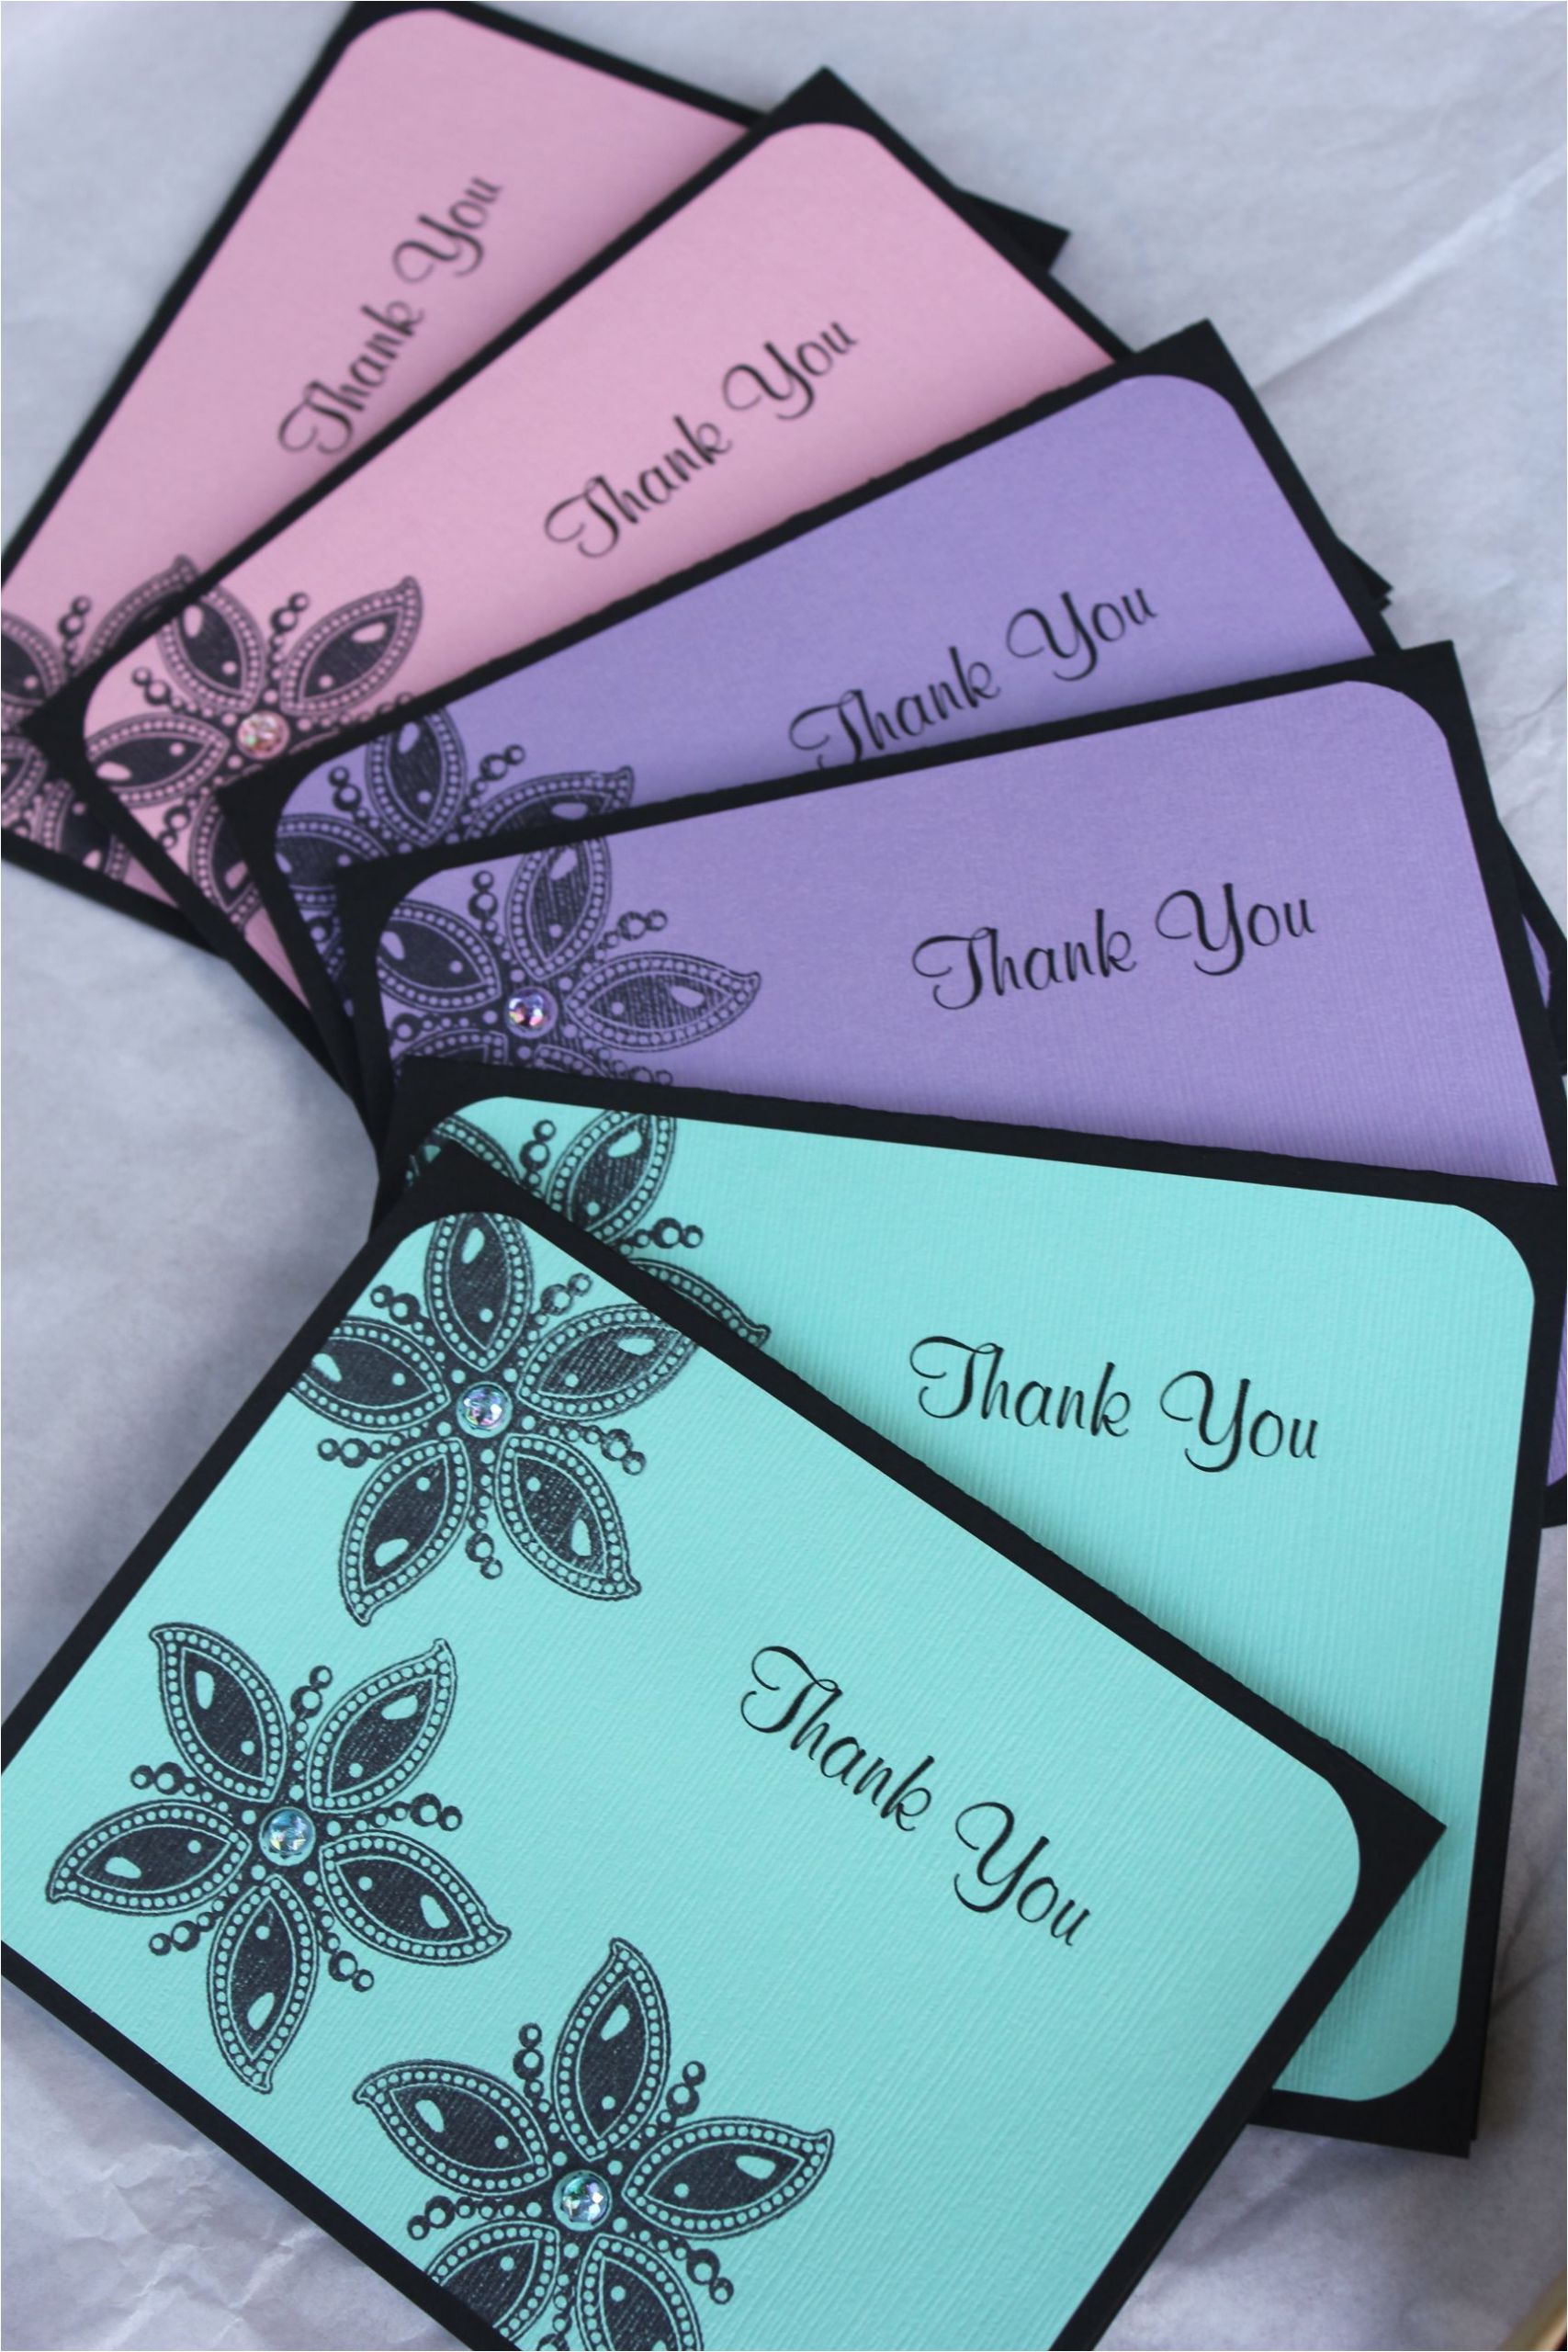 Thank You Greeting Card Handmade Handmade Thank You Cards by Craftedbylizc Handmade Thank